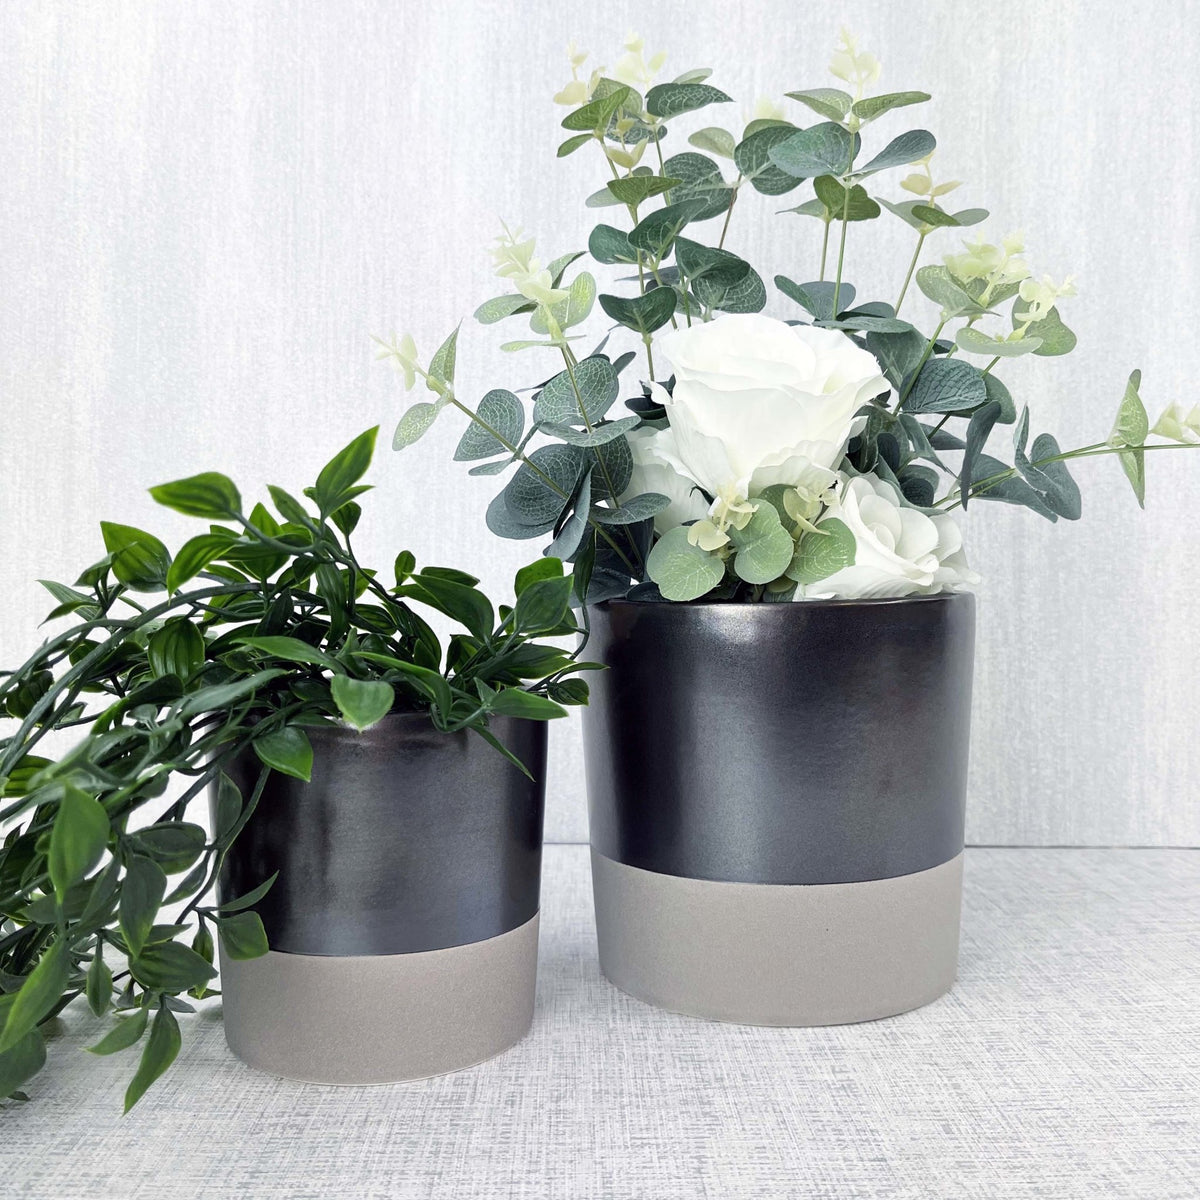 Terra Grey Metallic Style Planters with flowers and greenery in